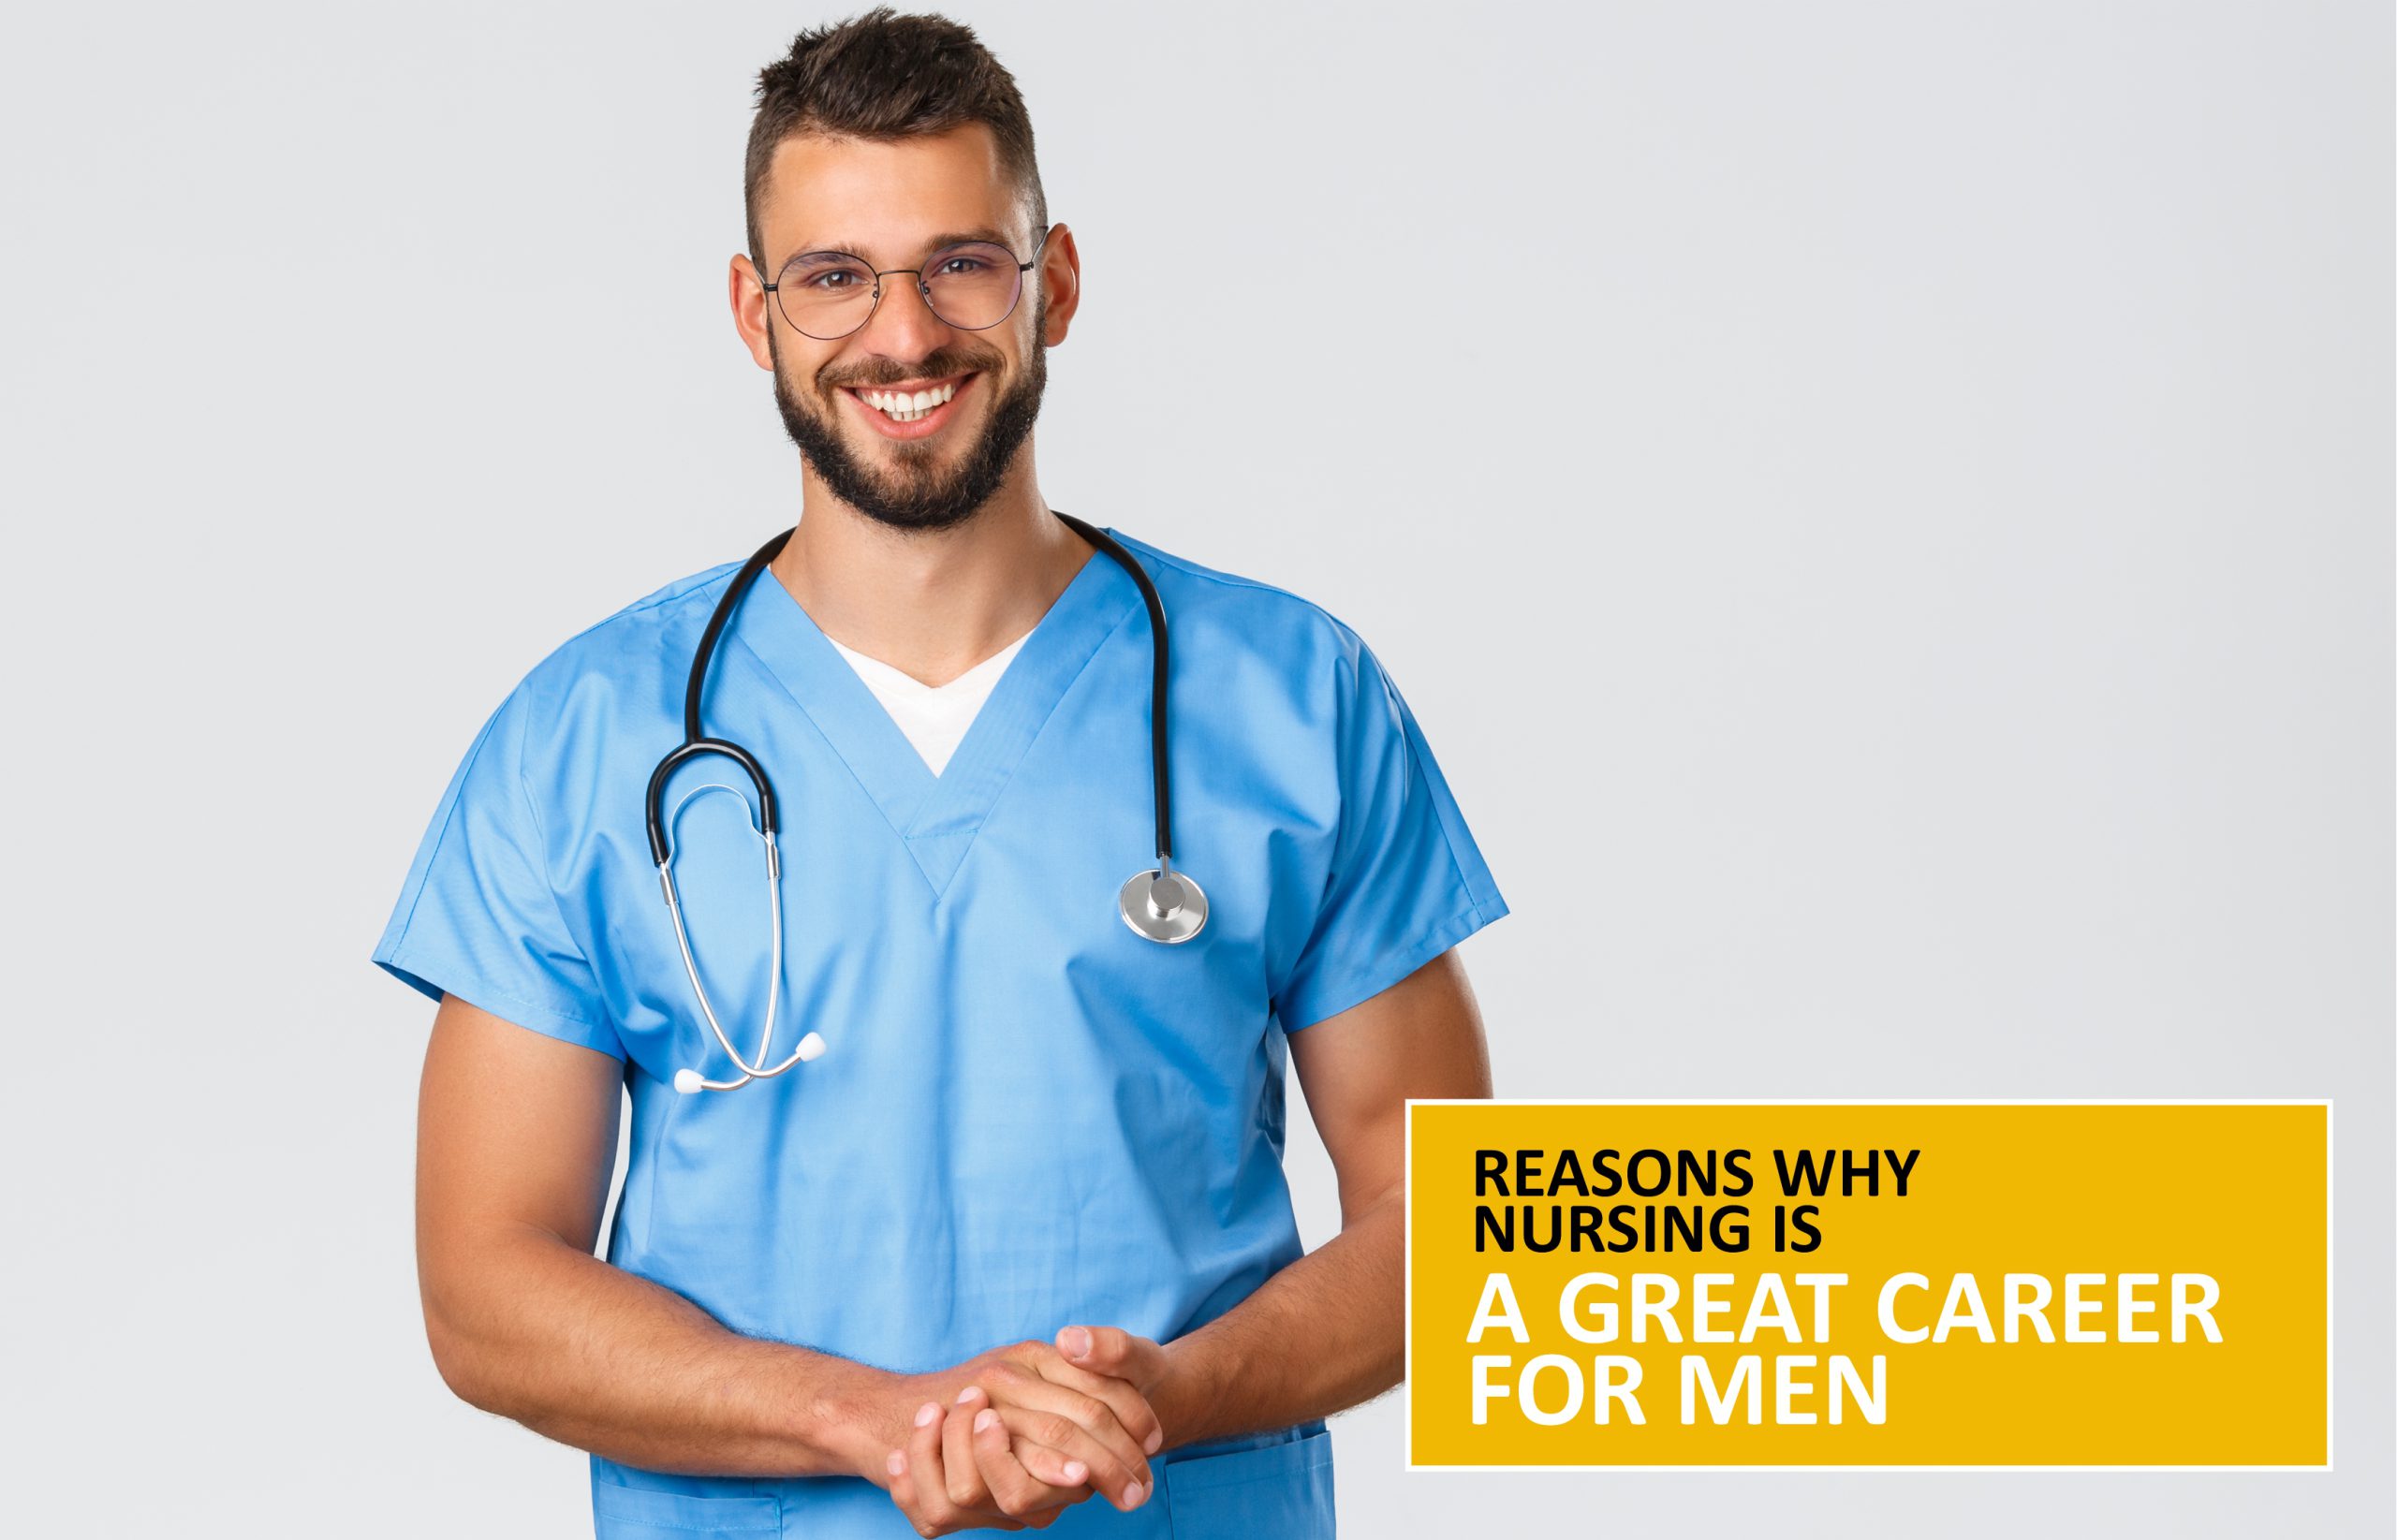 5 Reasons Why Nursing is a Great Career for Men